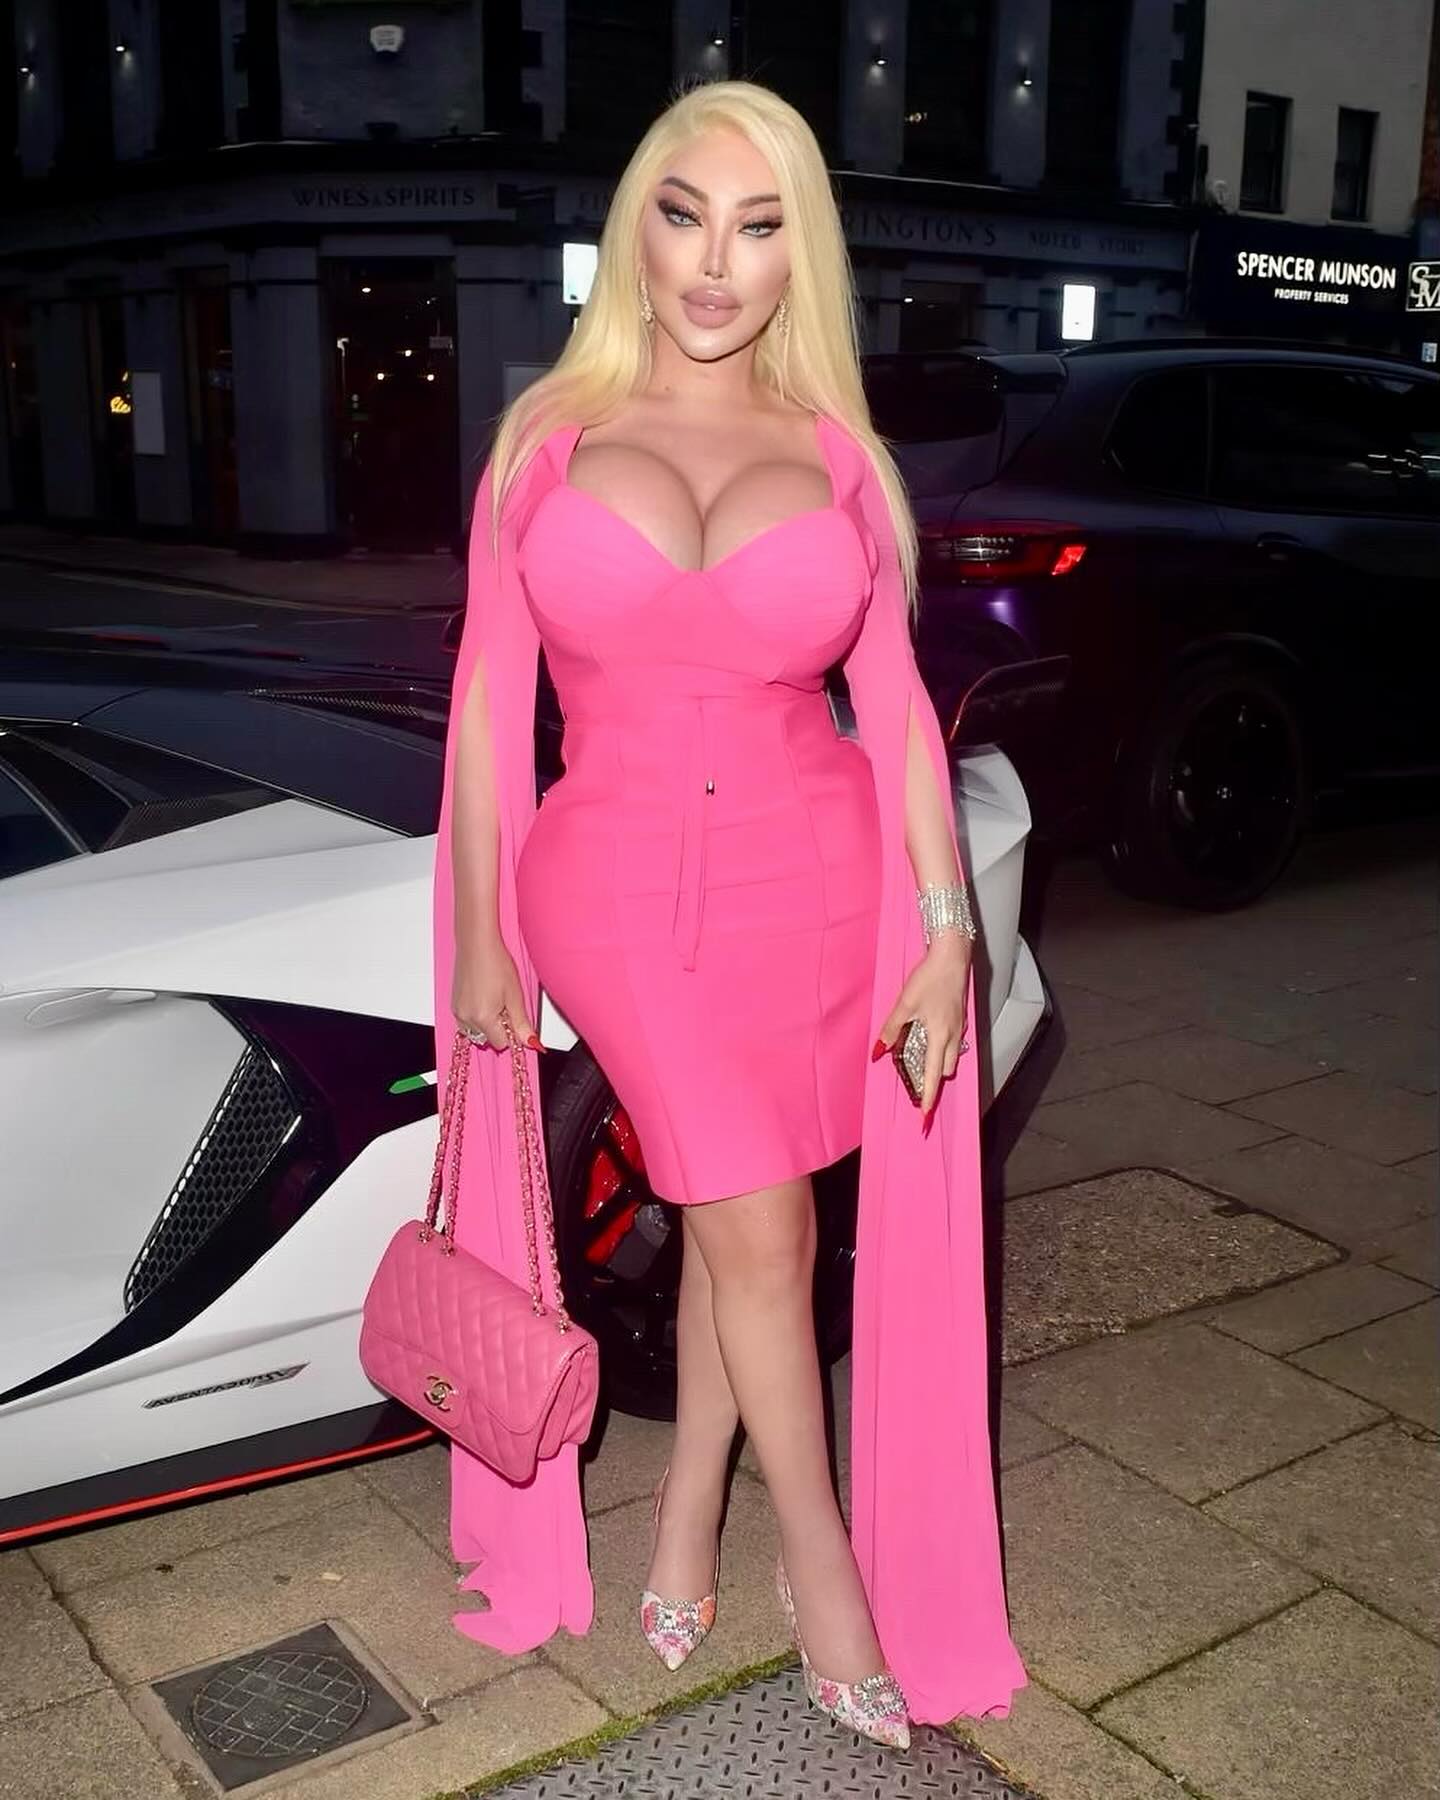 Life is like riding a bicycle. To keep your balance, you must keep moving in style by @FashionNova #NovaBabe #FashionNova 

#jessicaalves #pinkdress